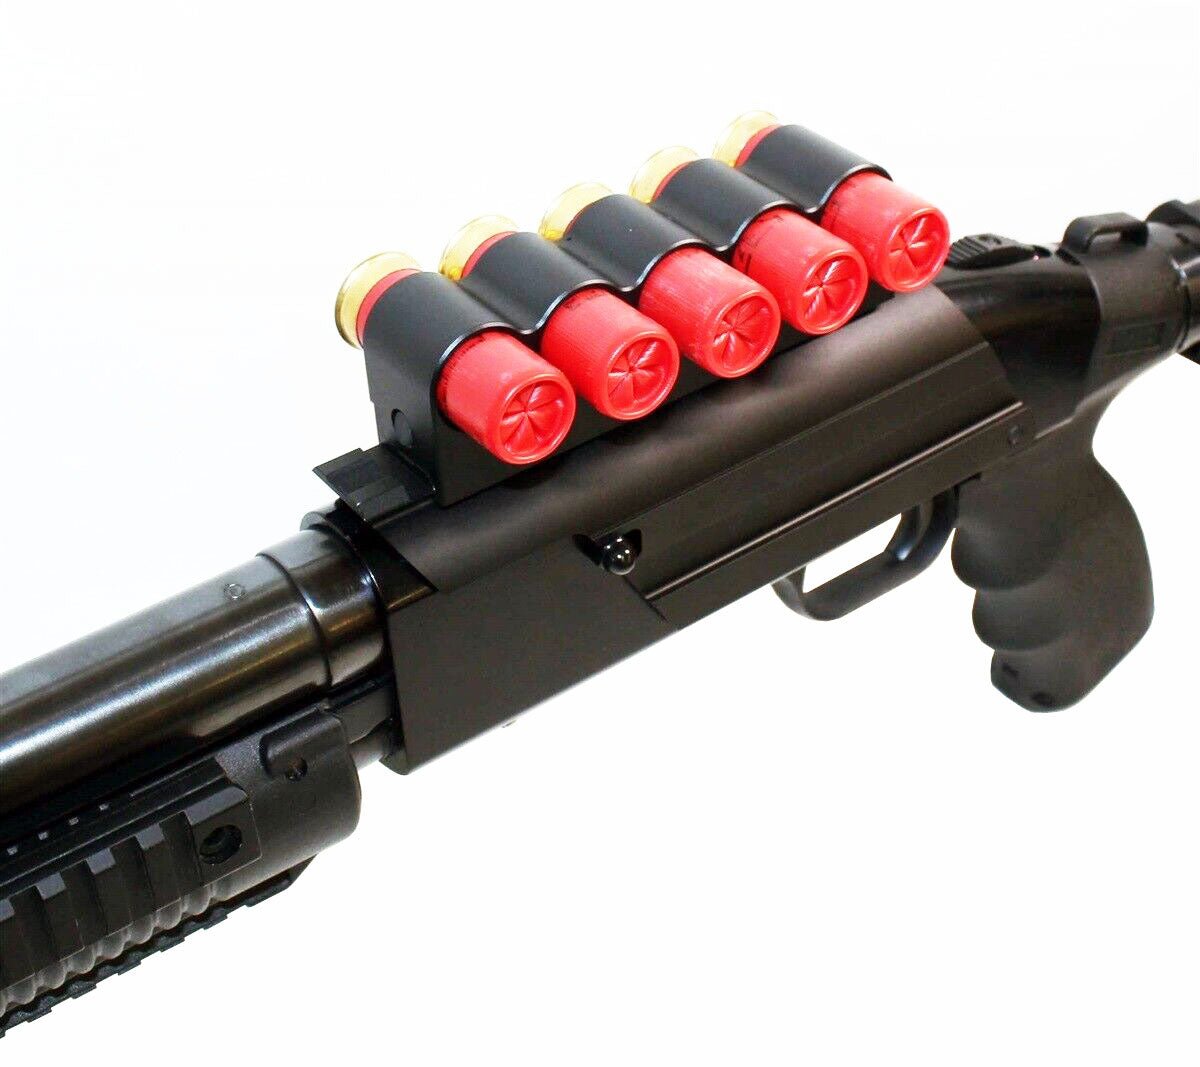 Trinity Tactical Aluminum Shell Holder Picatinny Style Compatible With 12 Gauge Shotguns. - TRINITY SUPPLY INC